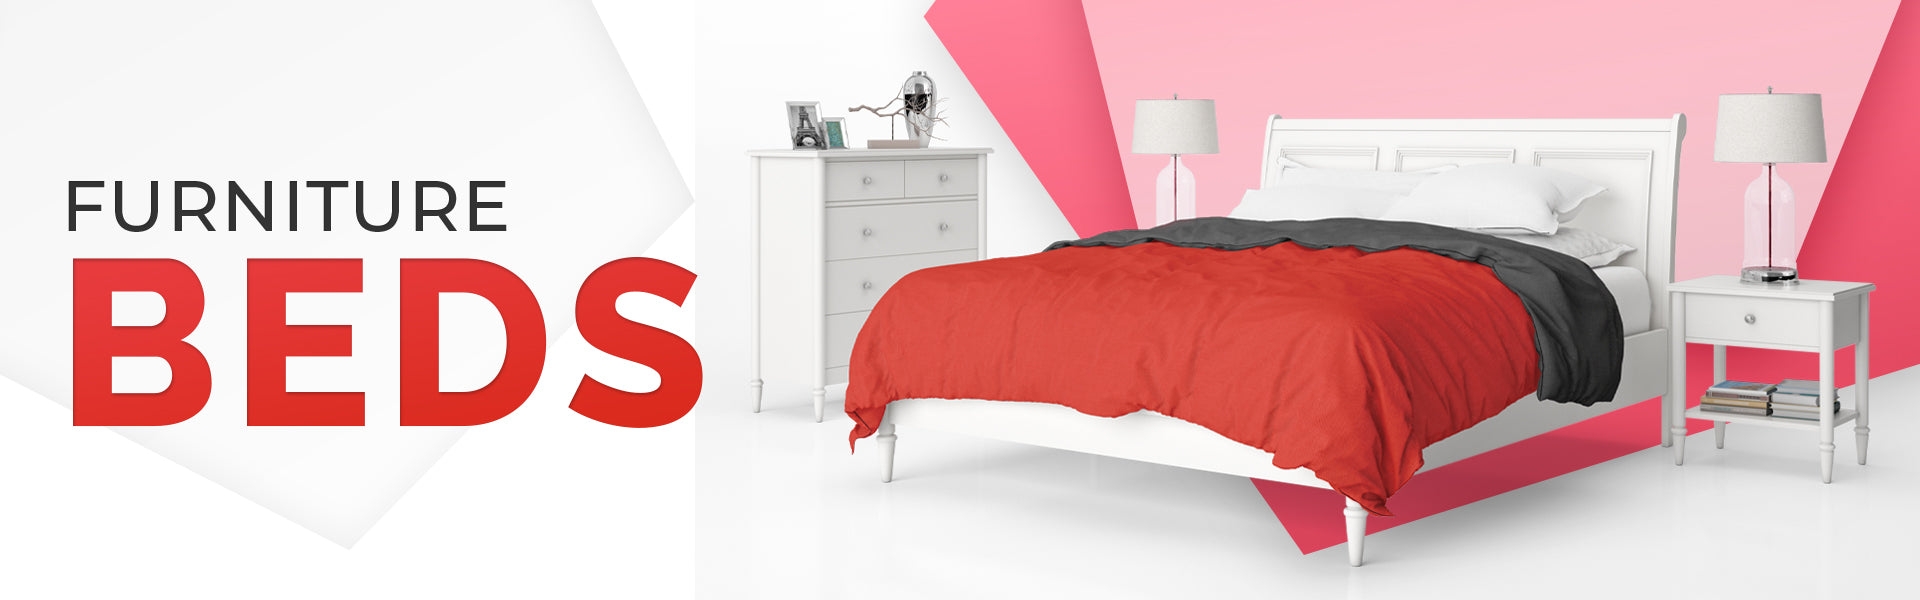 bedroom set, 5 drawer chest, mattress on wooden bed with red comforter , between 2 night stands with lamps on top, furniture beds